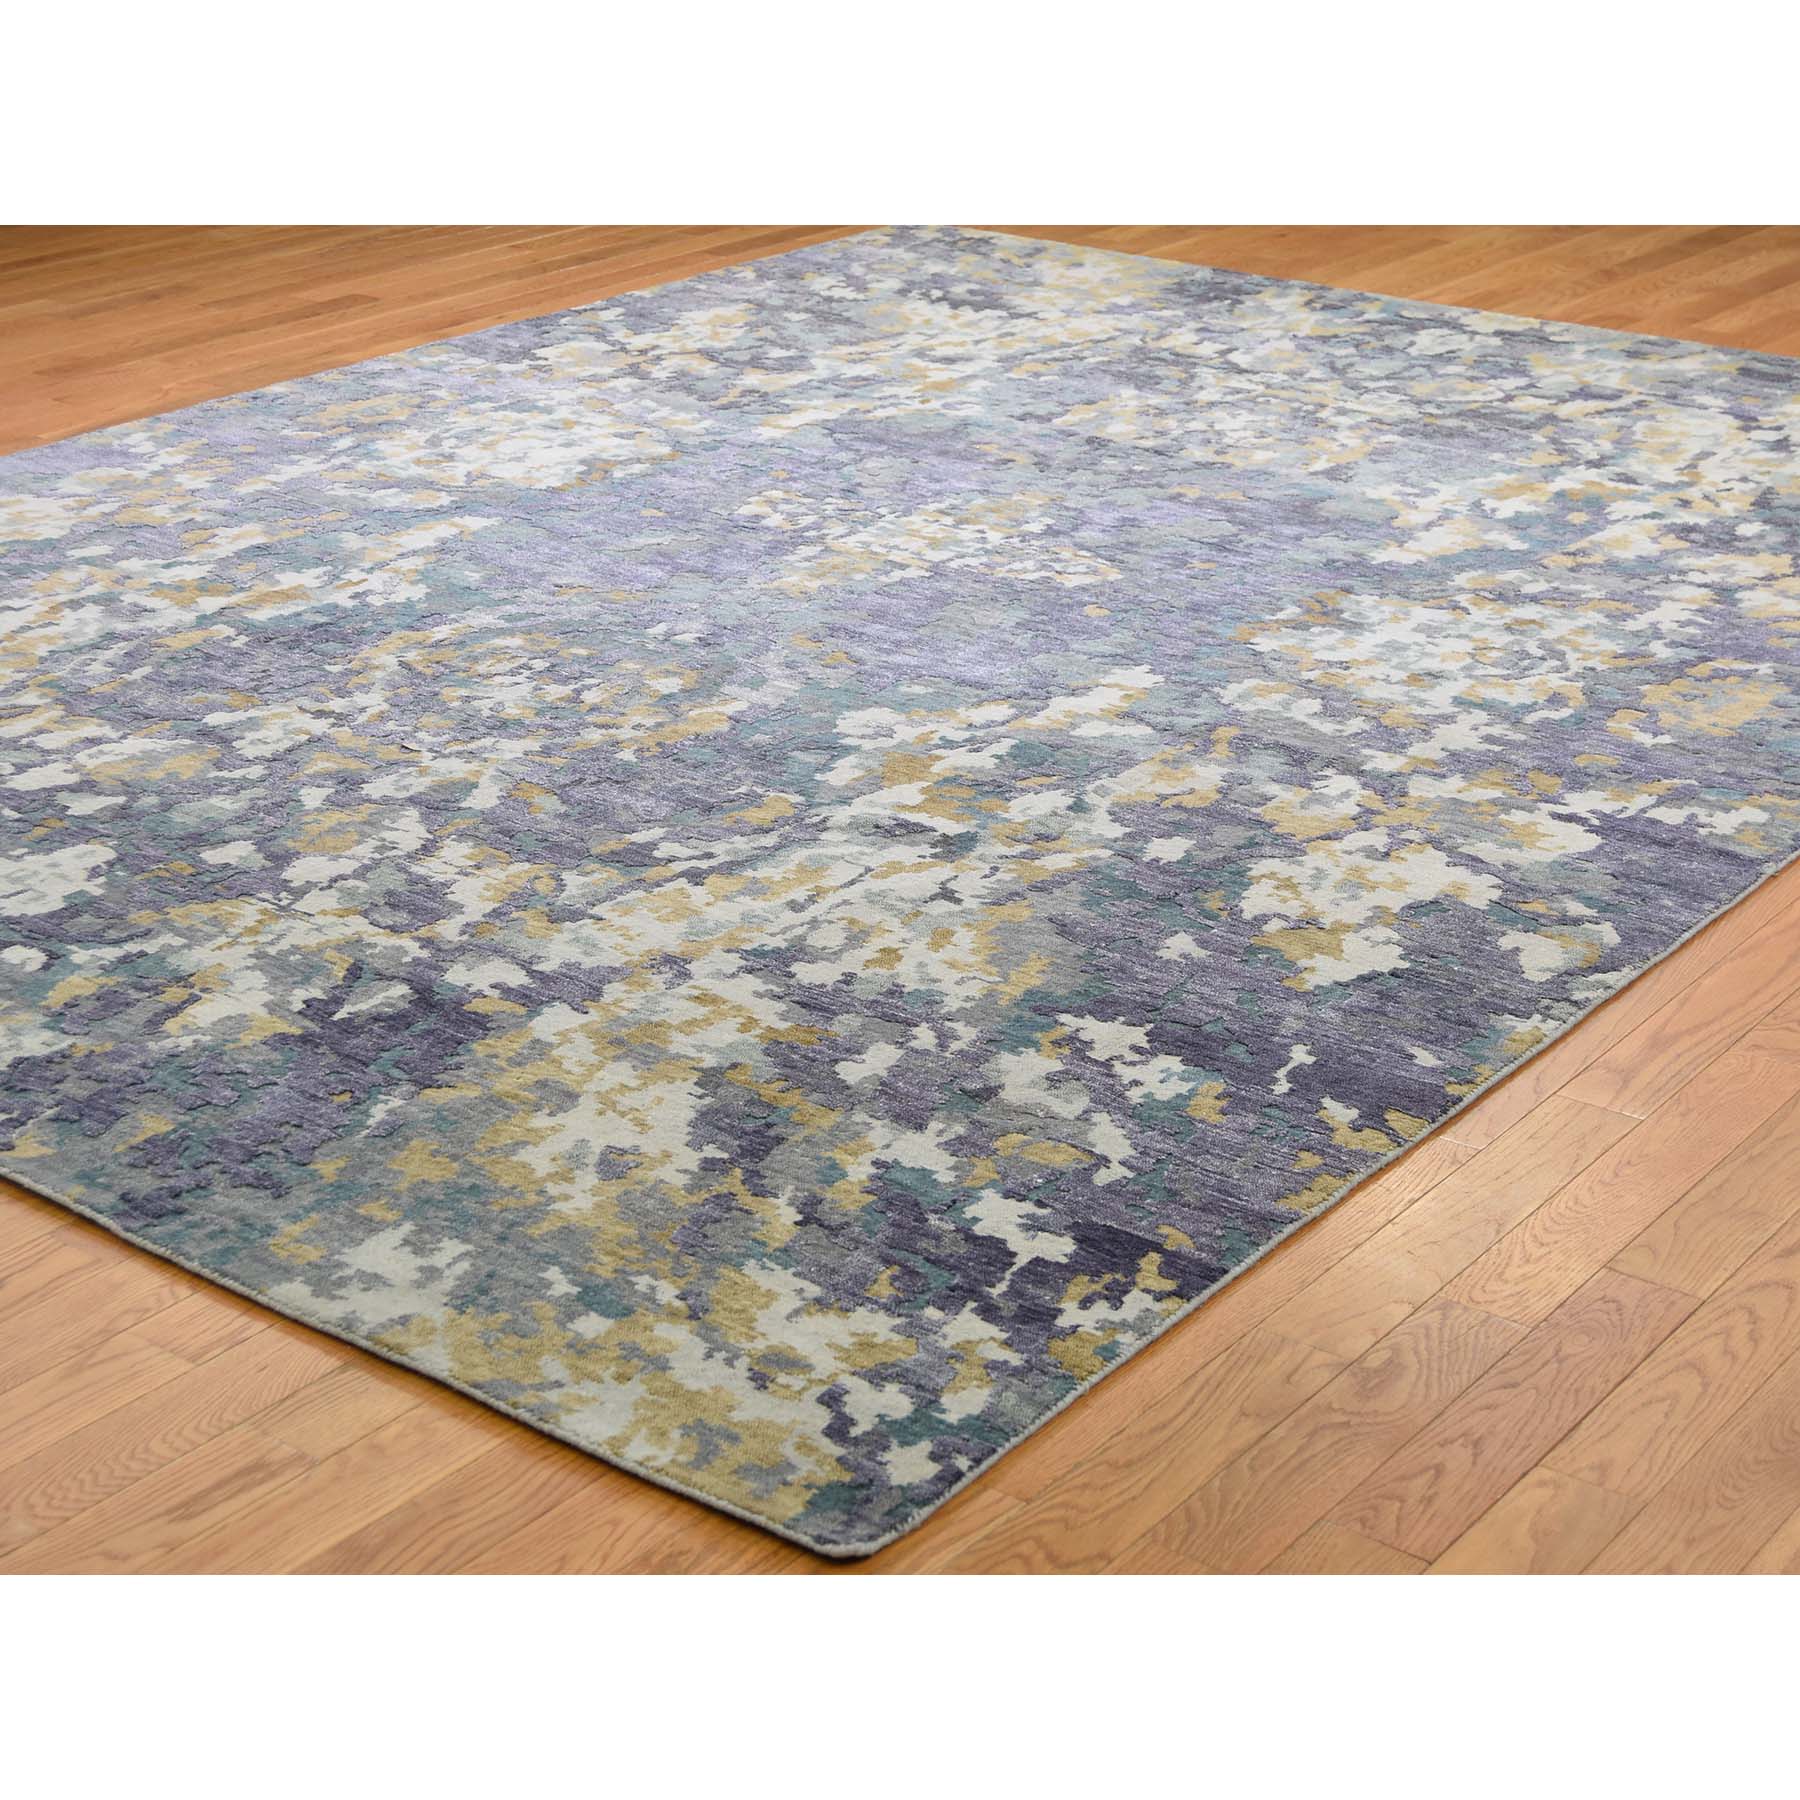 8-10 x11-7  Abstract Design Wool And Silk Hand-Knotted Oriental Rug 